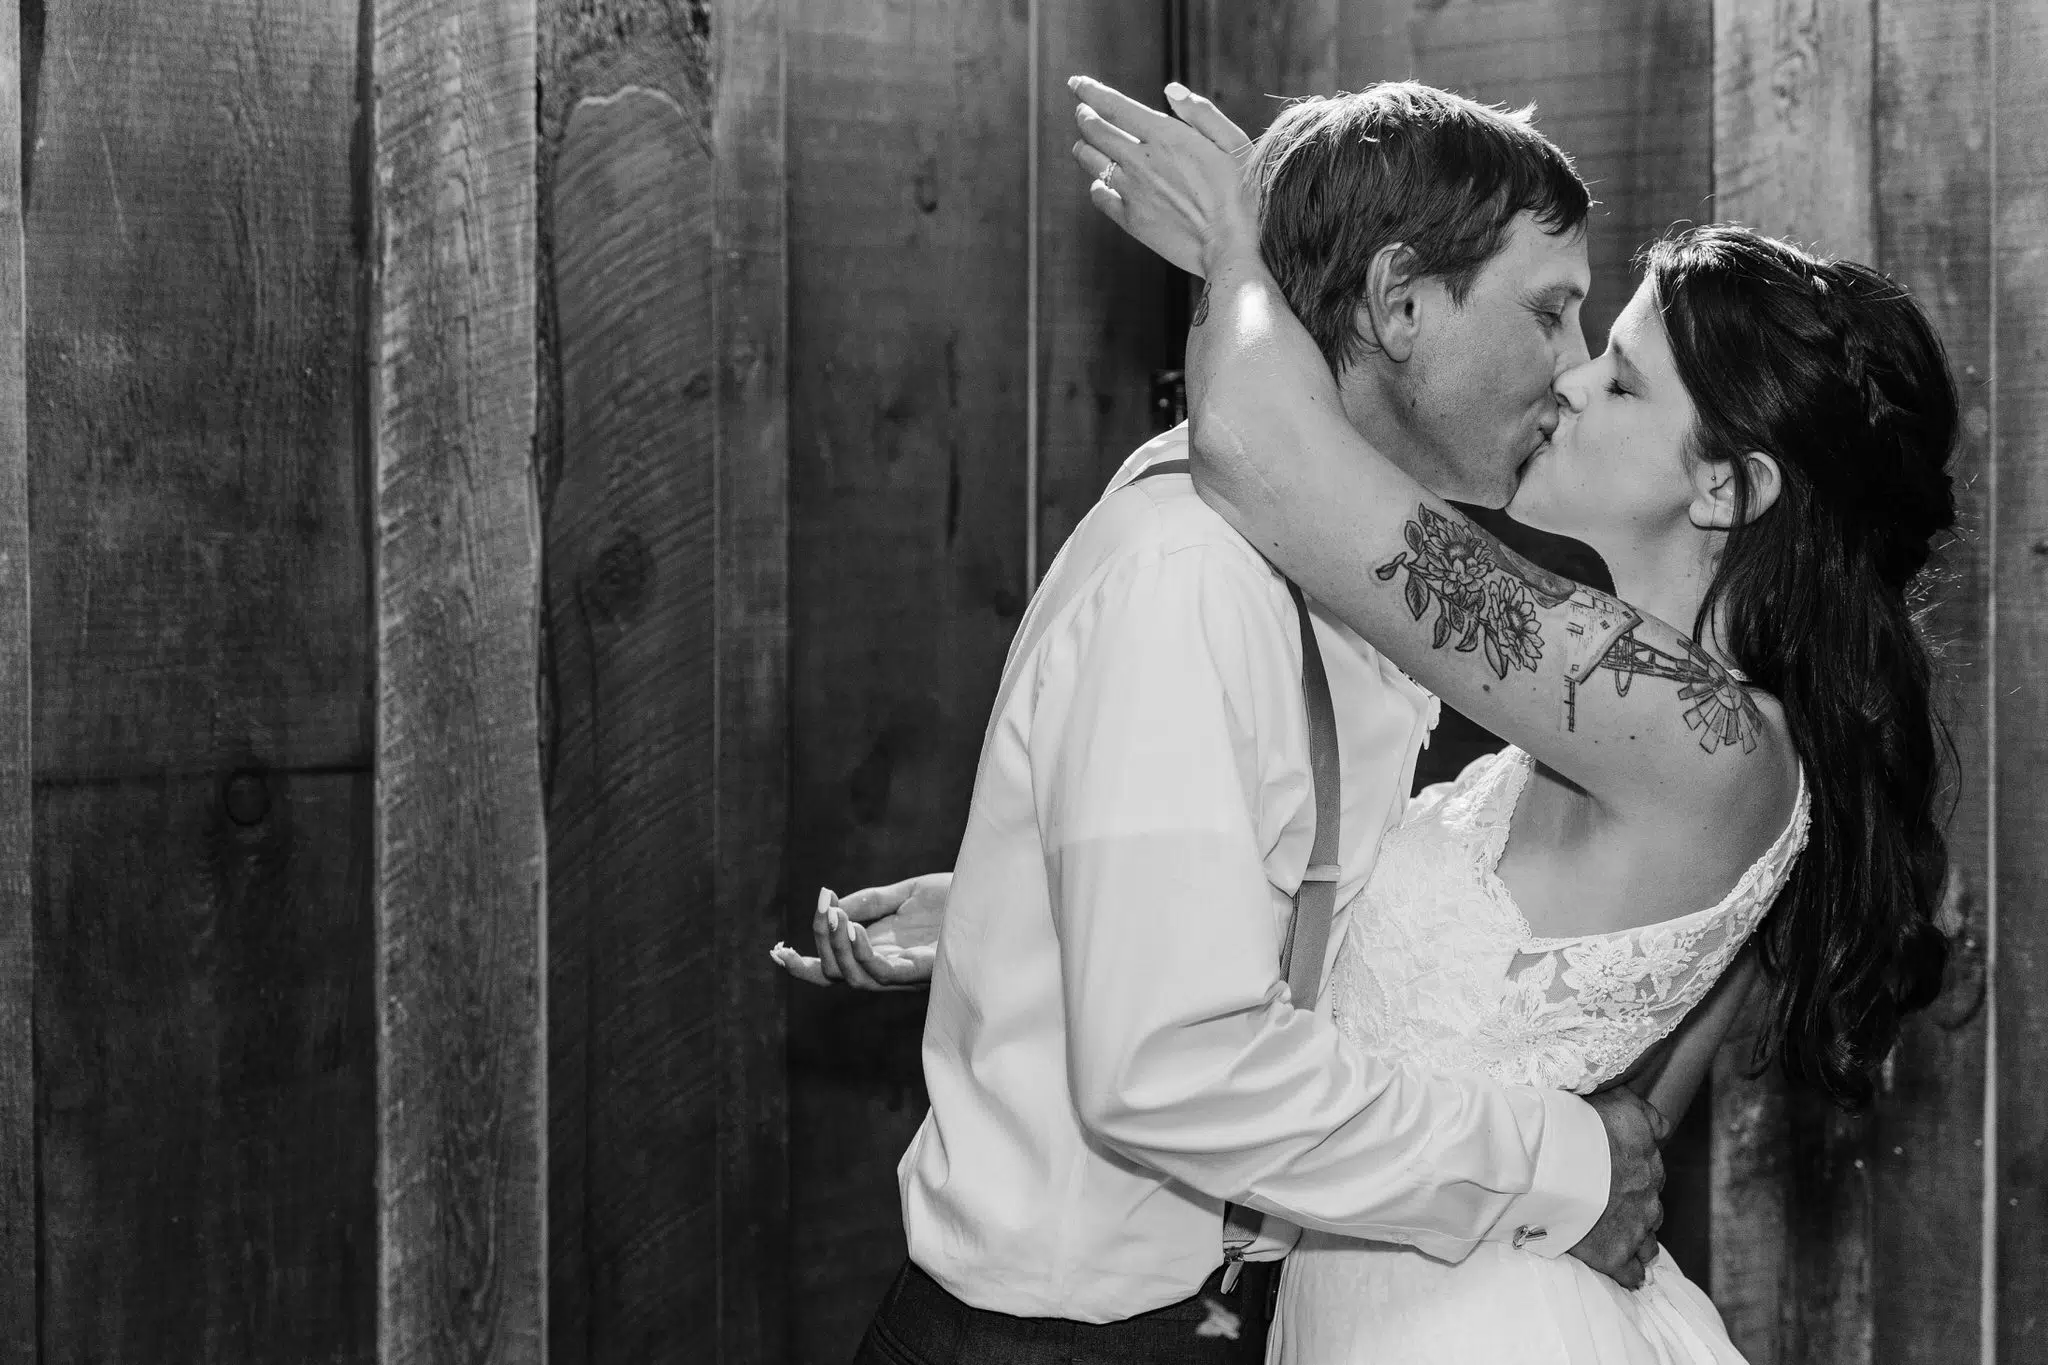 How Much Does A Wedding Photographer Cost // Couple Kissing At Wedding Reception